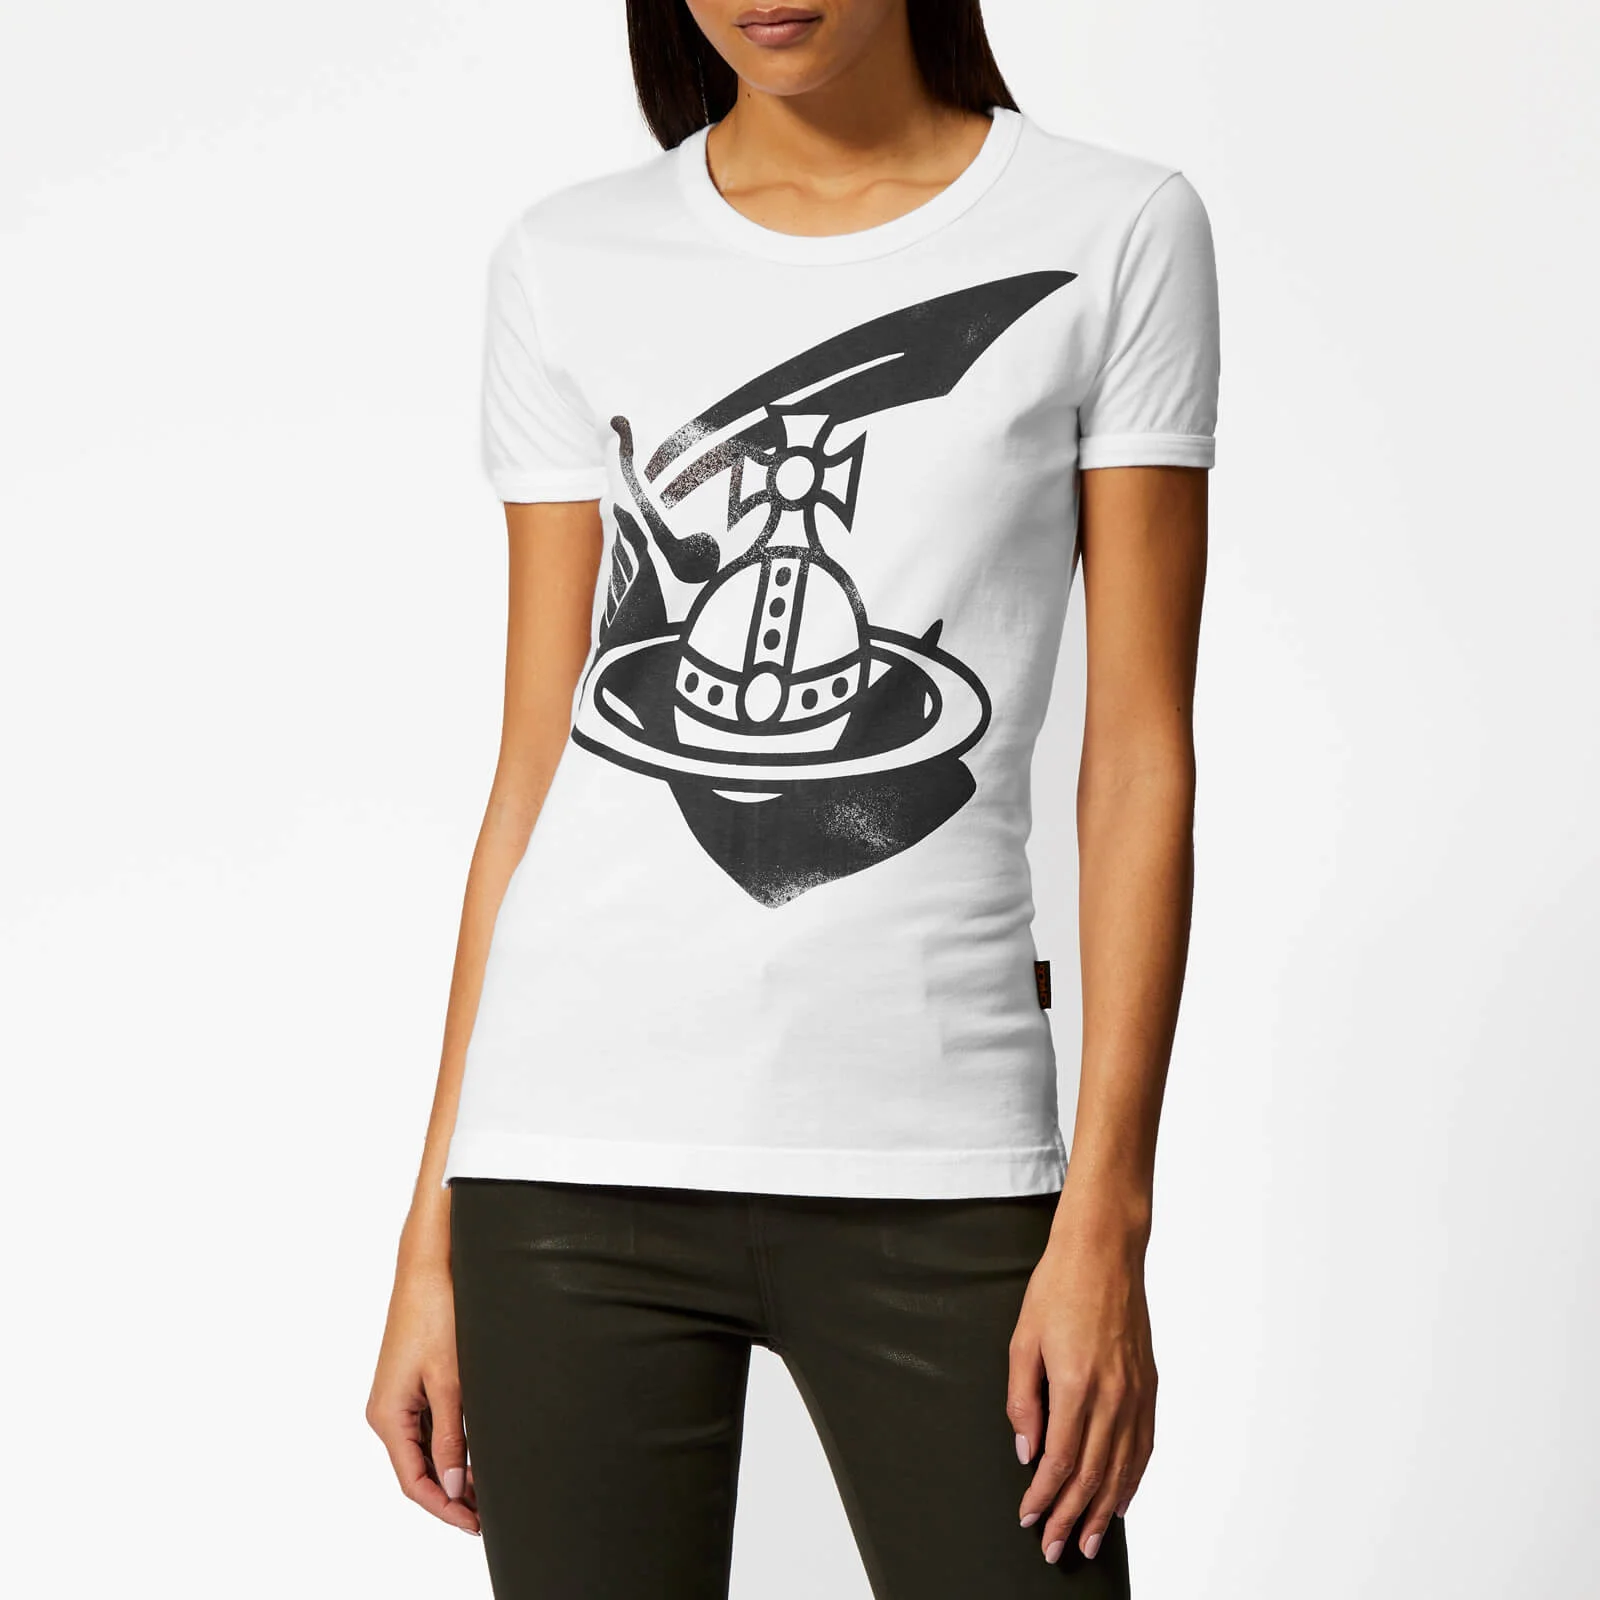 Vivienne Westwood Anglomania Women's Classic T-Shirt - White Image 1